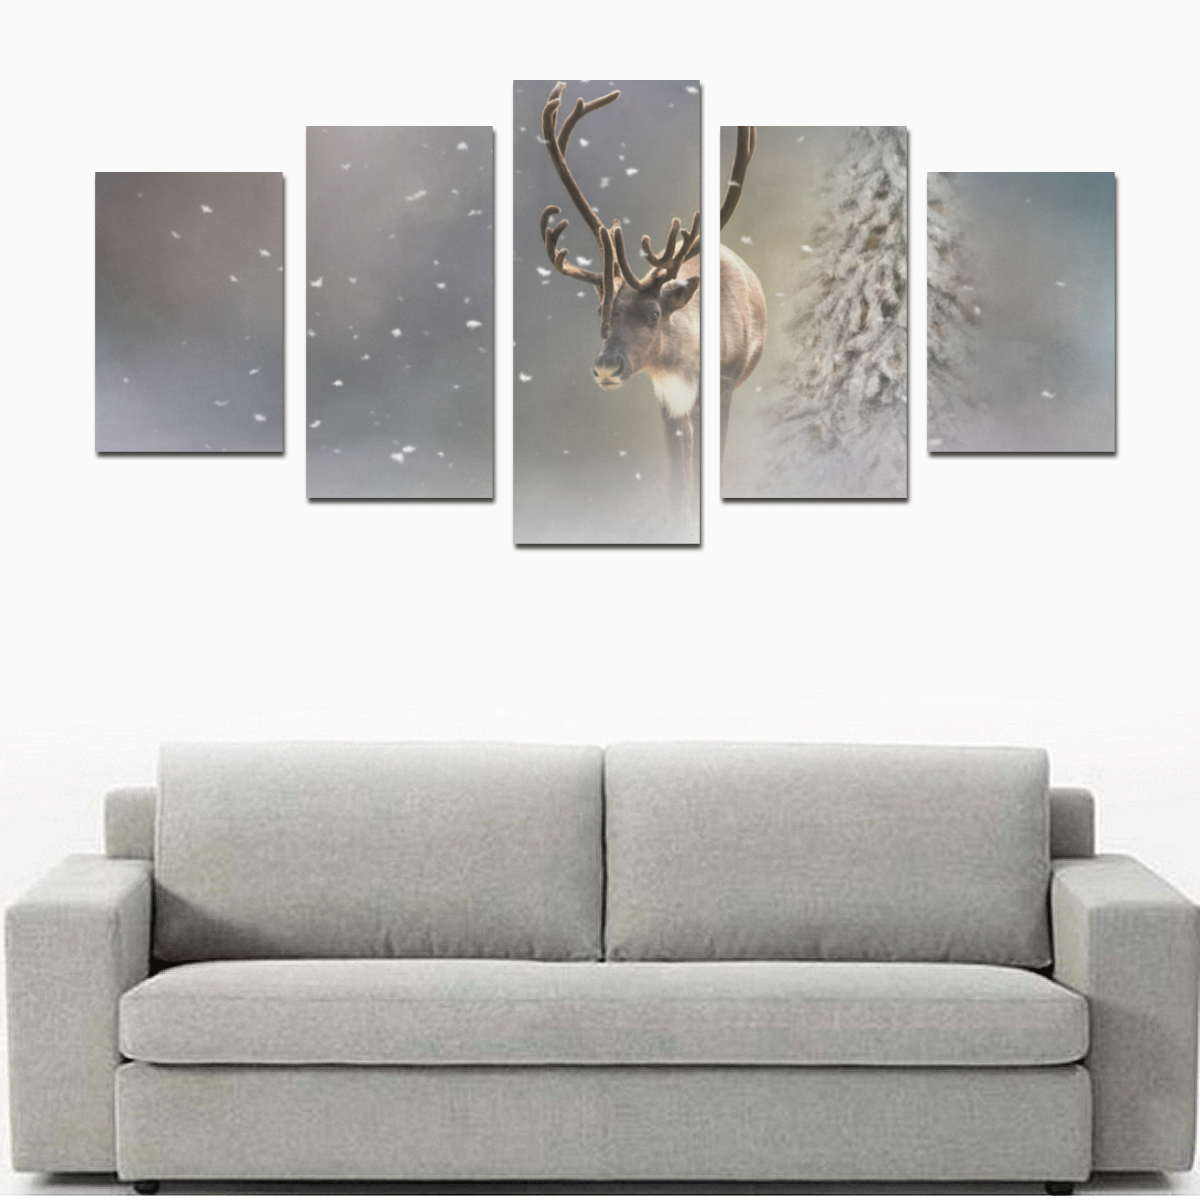 Santa Claus Reindeer in the snow Canvas Print Sets D (No Frame)